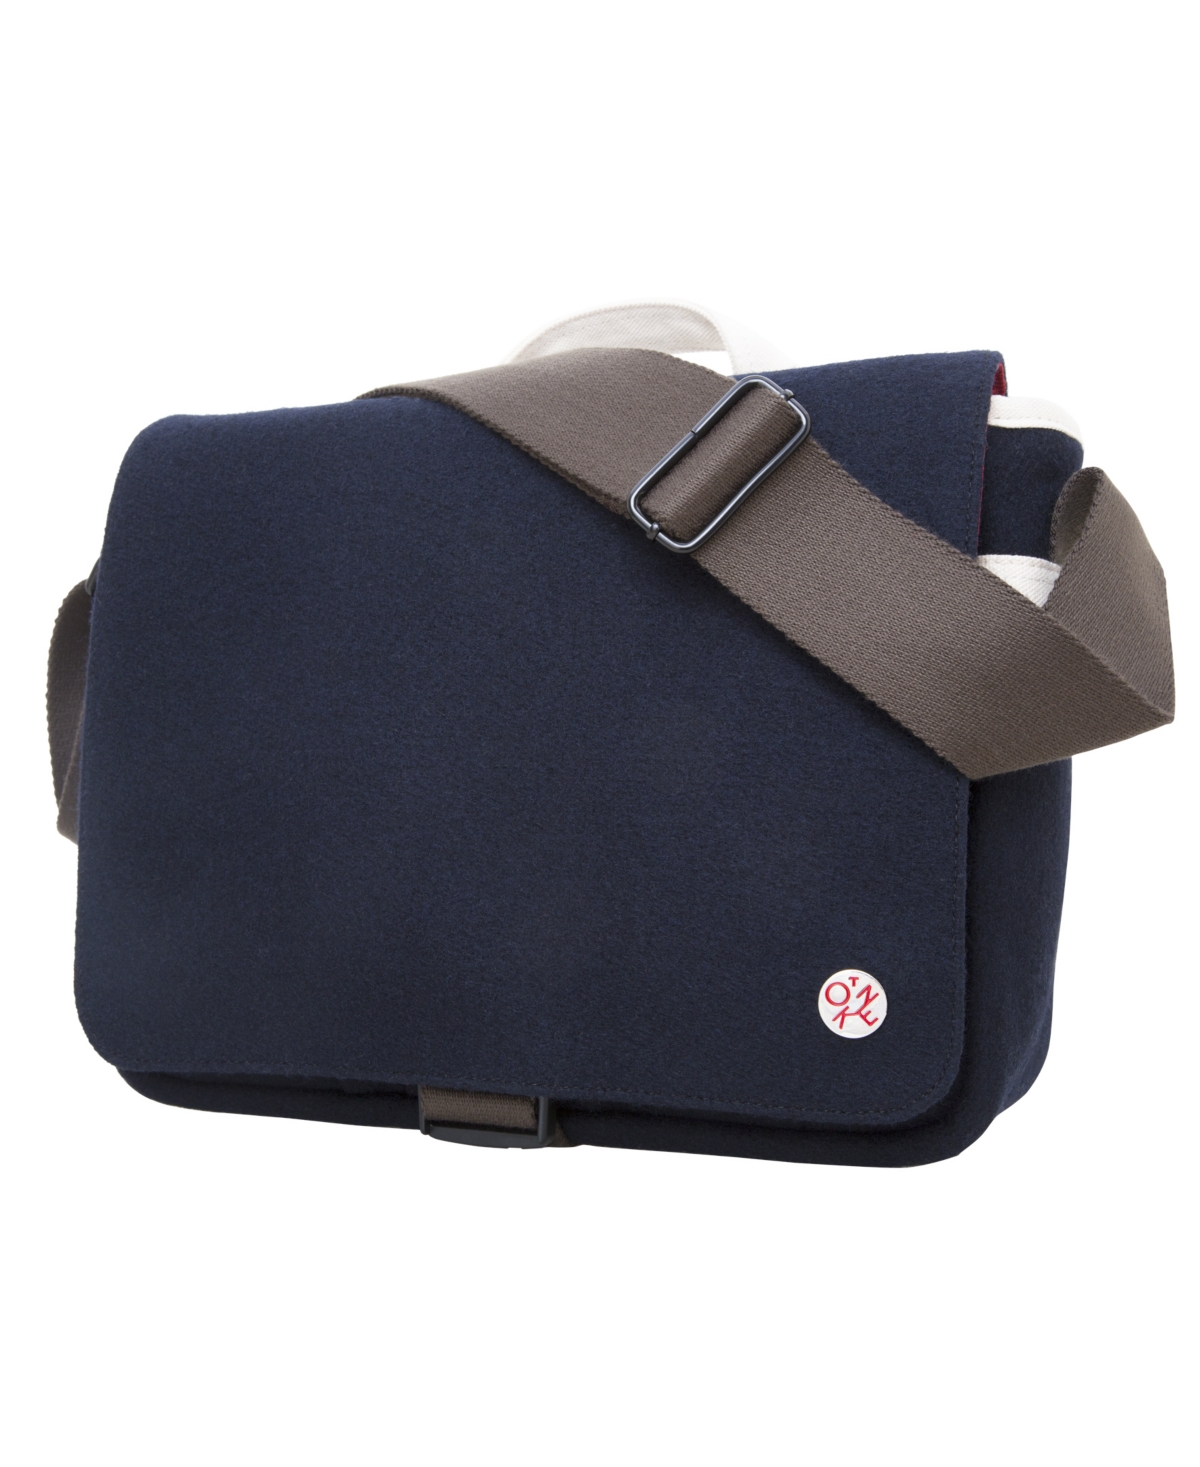 Woolrich West Point Grant Small Shoulder Bag with Back Zipper - Navy